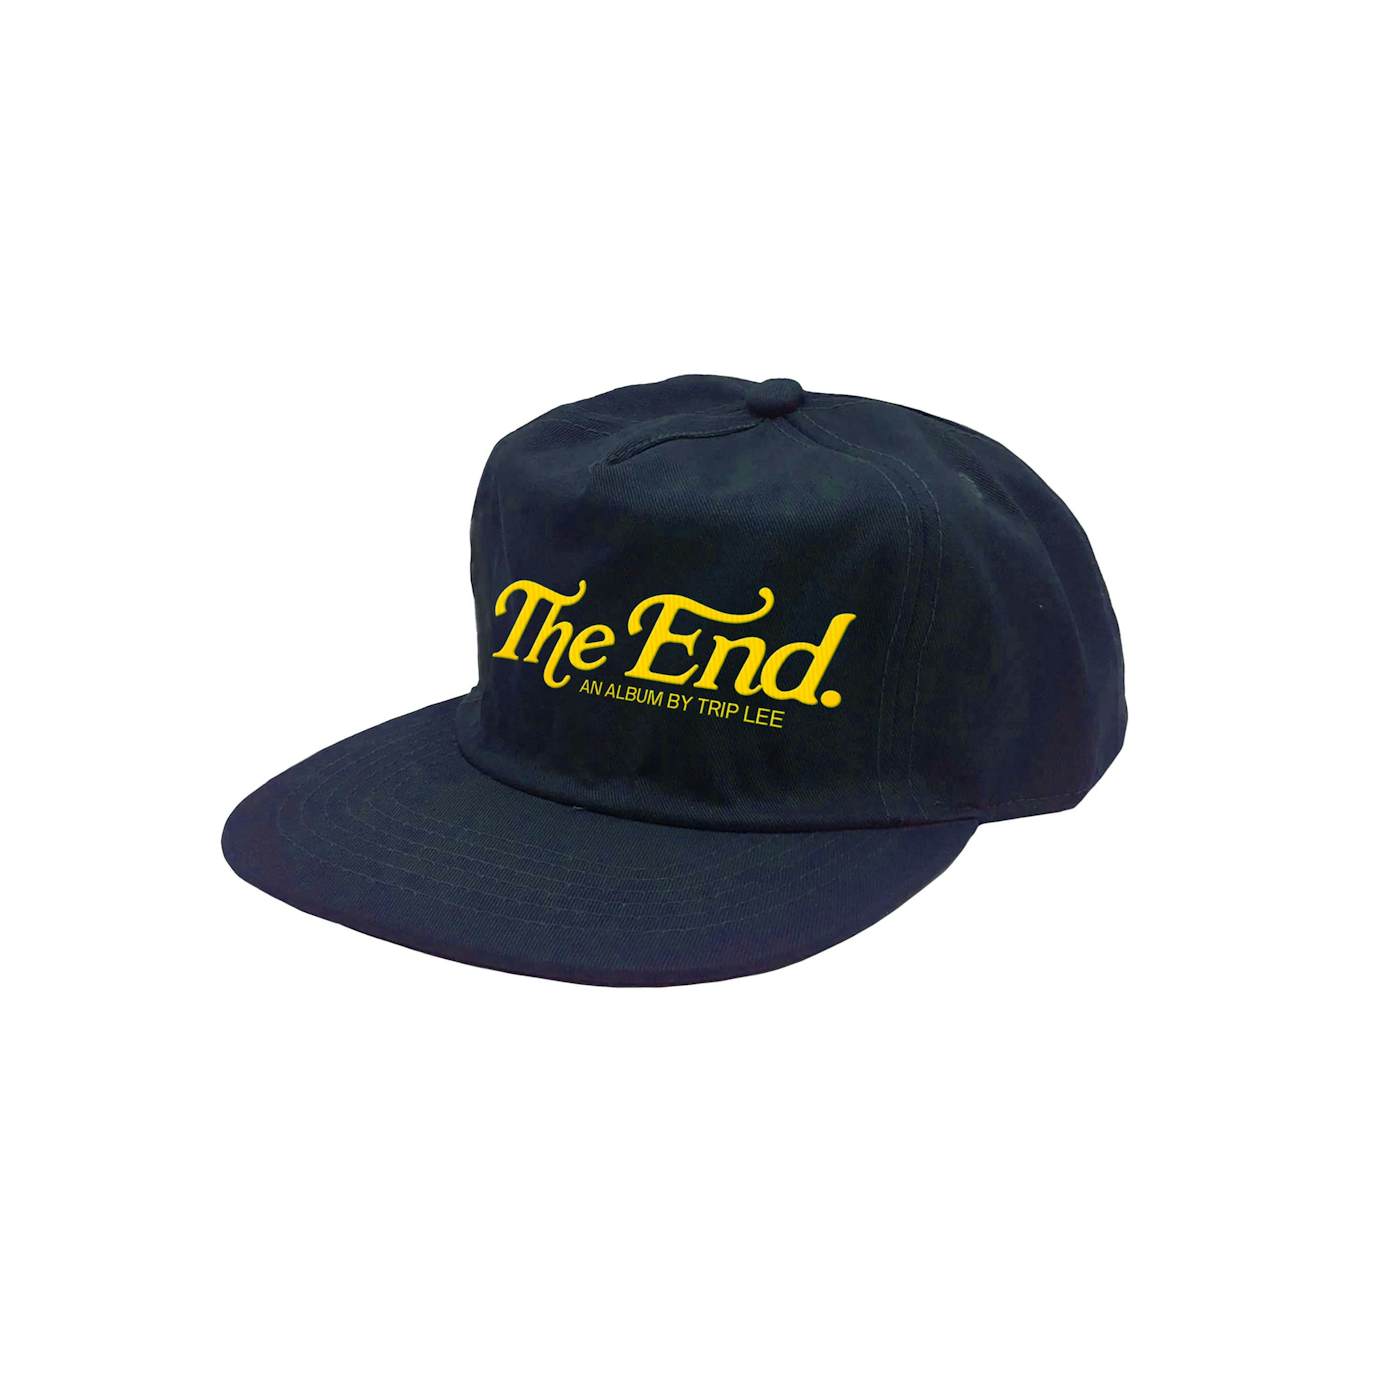 Trip Lee "The End" 5-Panel Hat